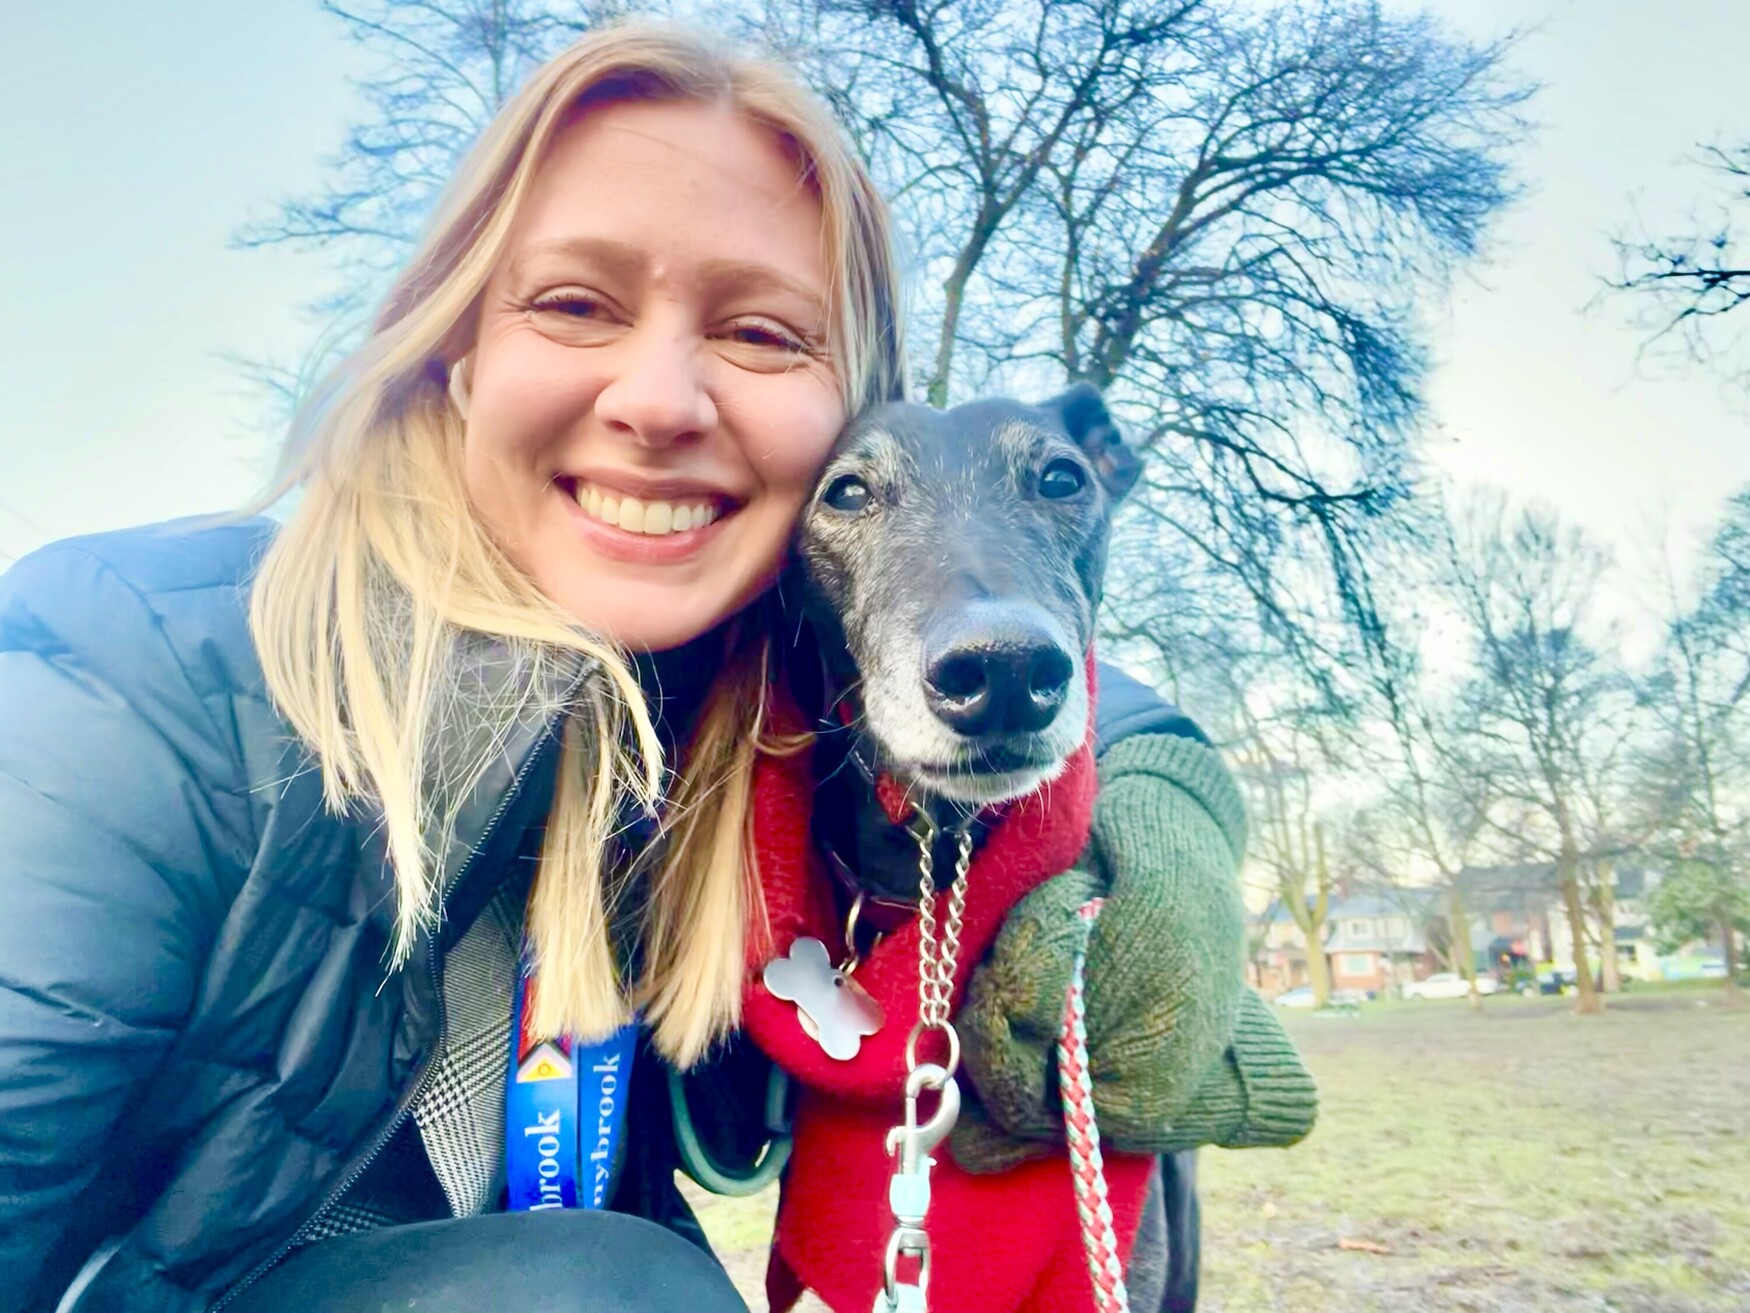 Dr. Robyn Moxley and her greyhound in a park